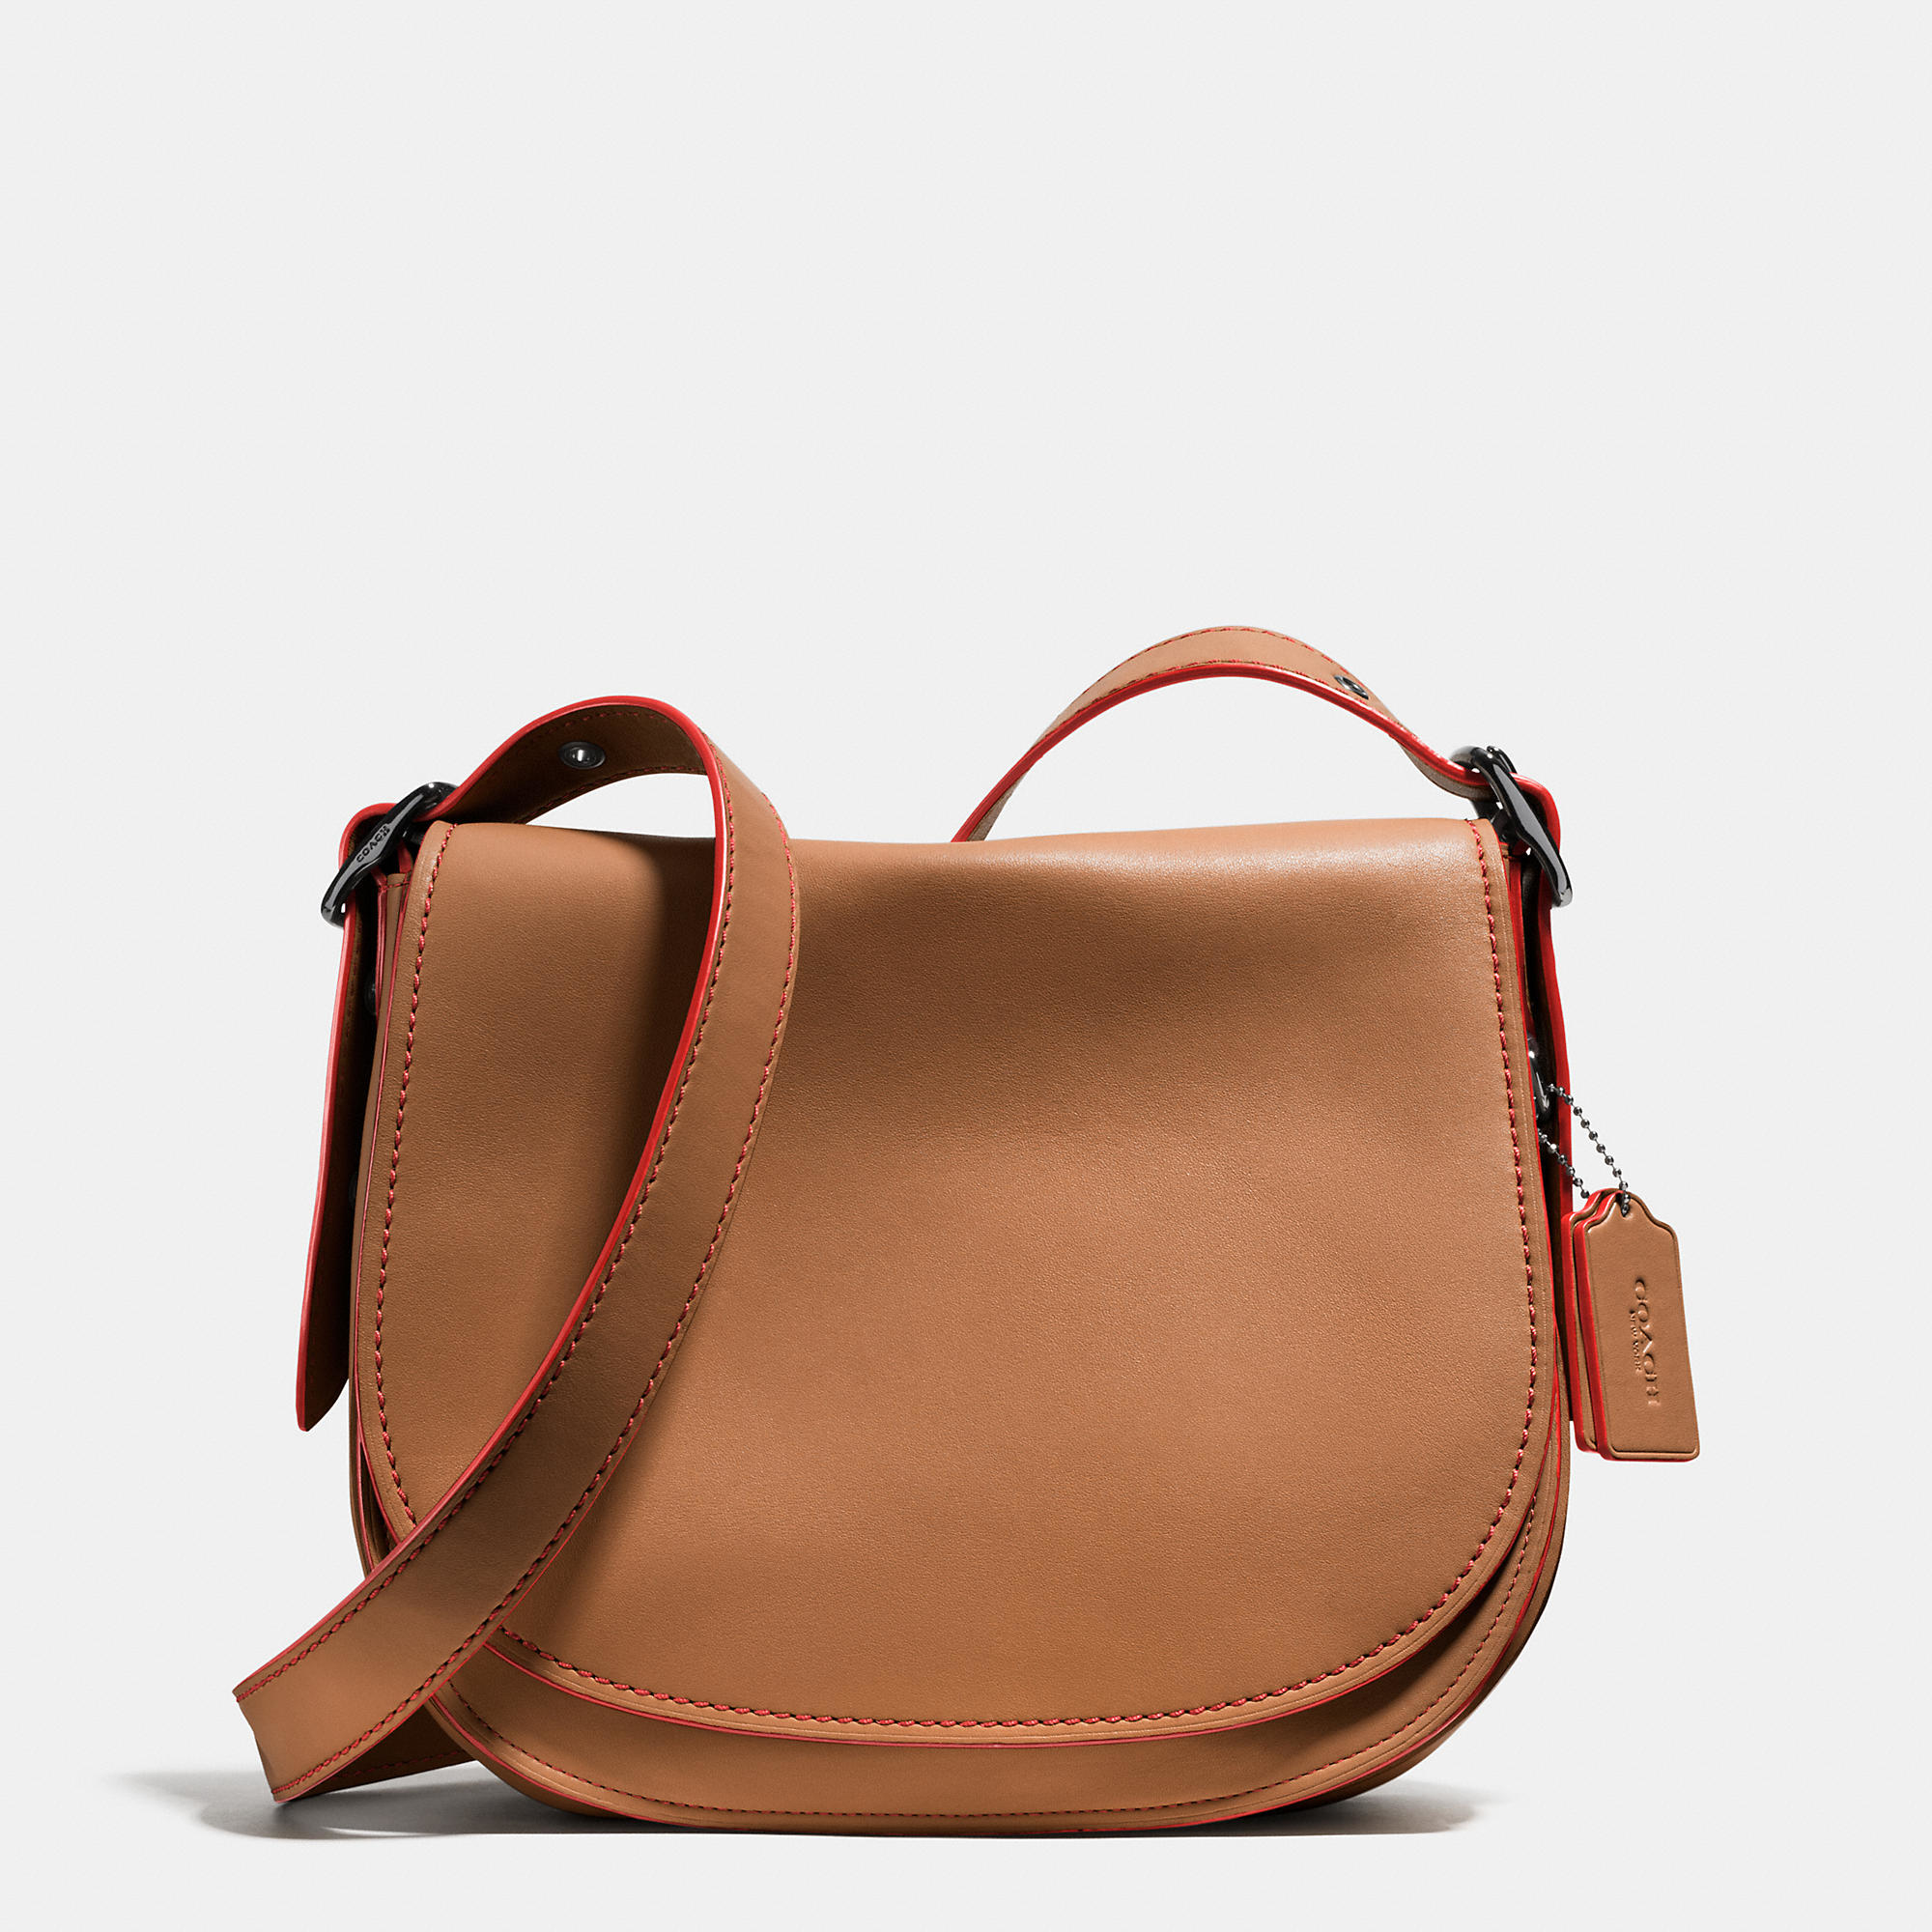 Lyst - COACH Saddle Bag In Glovetanned Leather in Brown